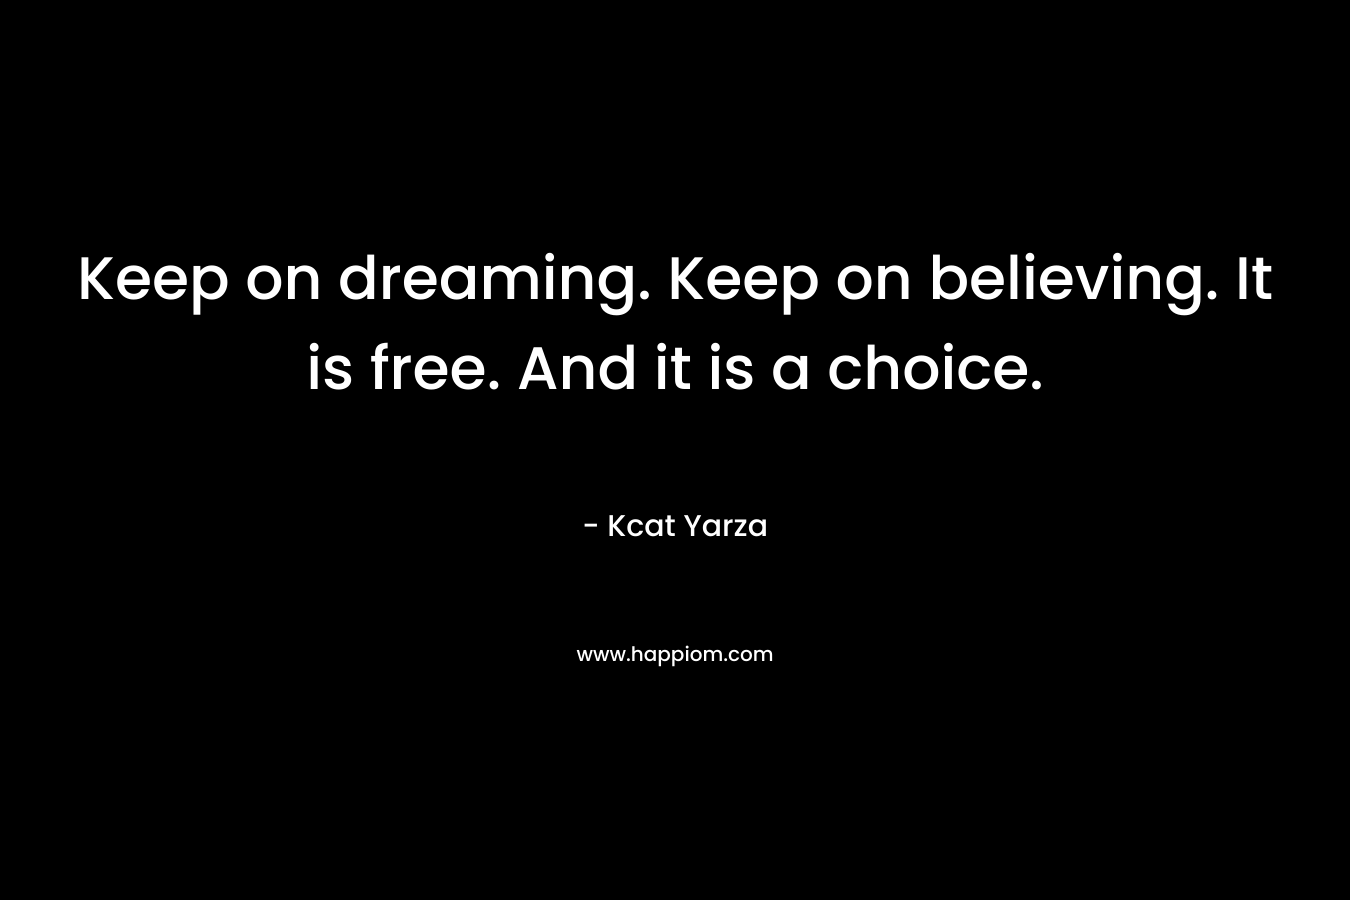 Keep on dreaming. Keep on believing. It is free. And it is a choice.